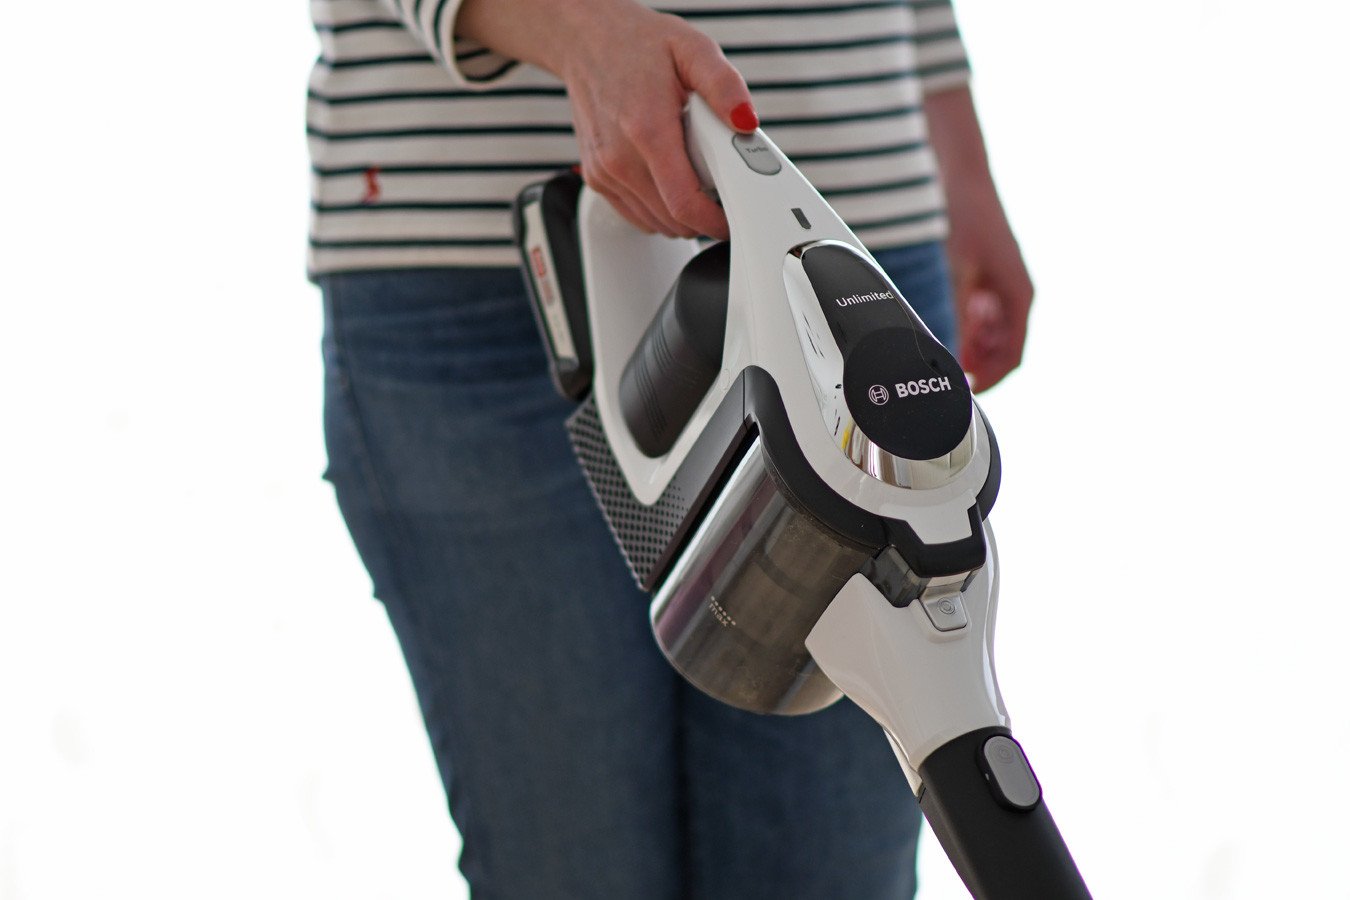 Bosch Unlimited Vacuum Cleaner Review